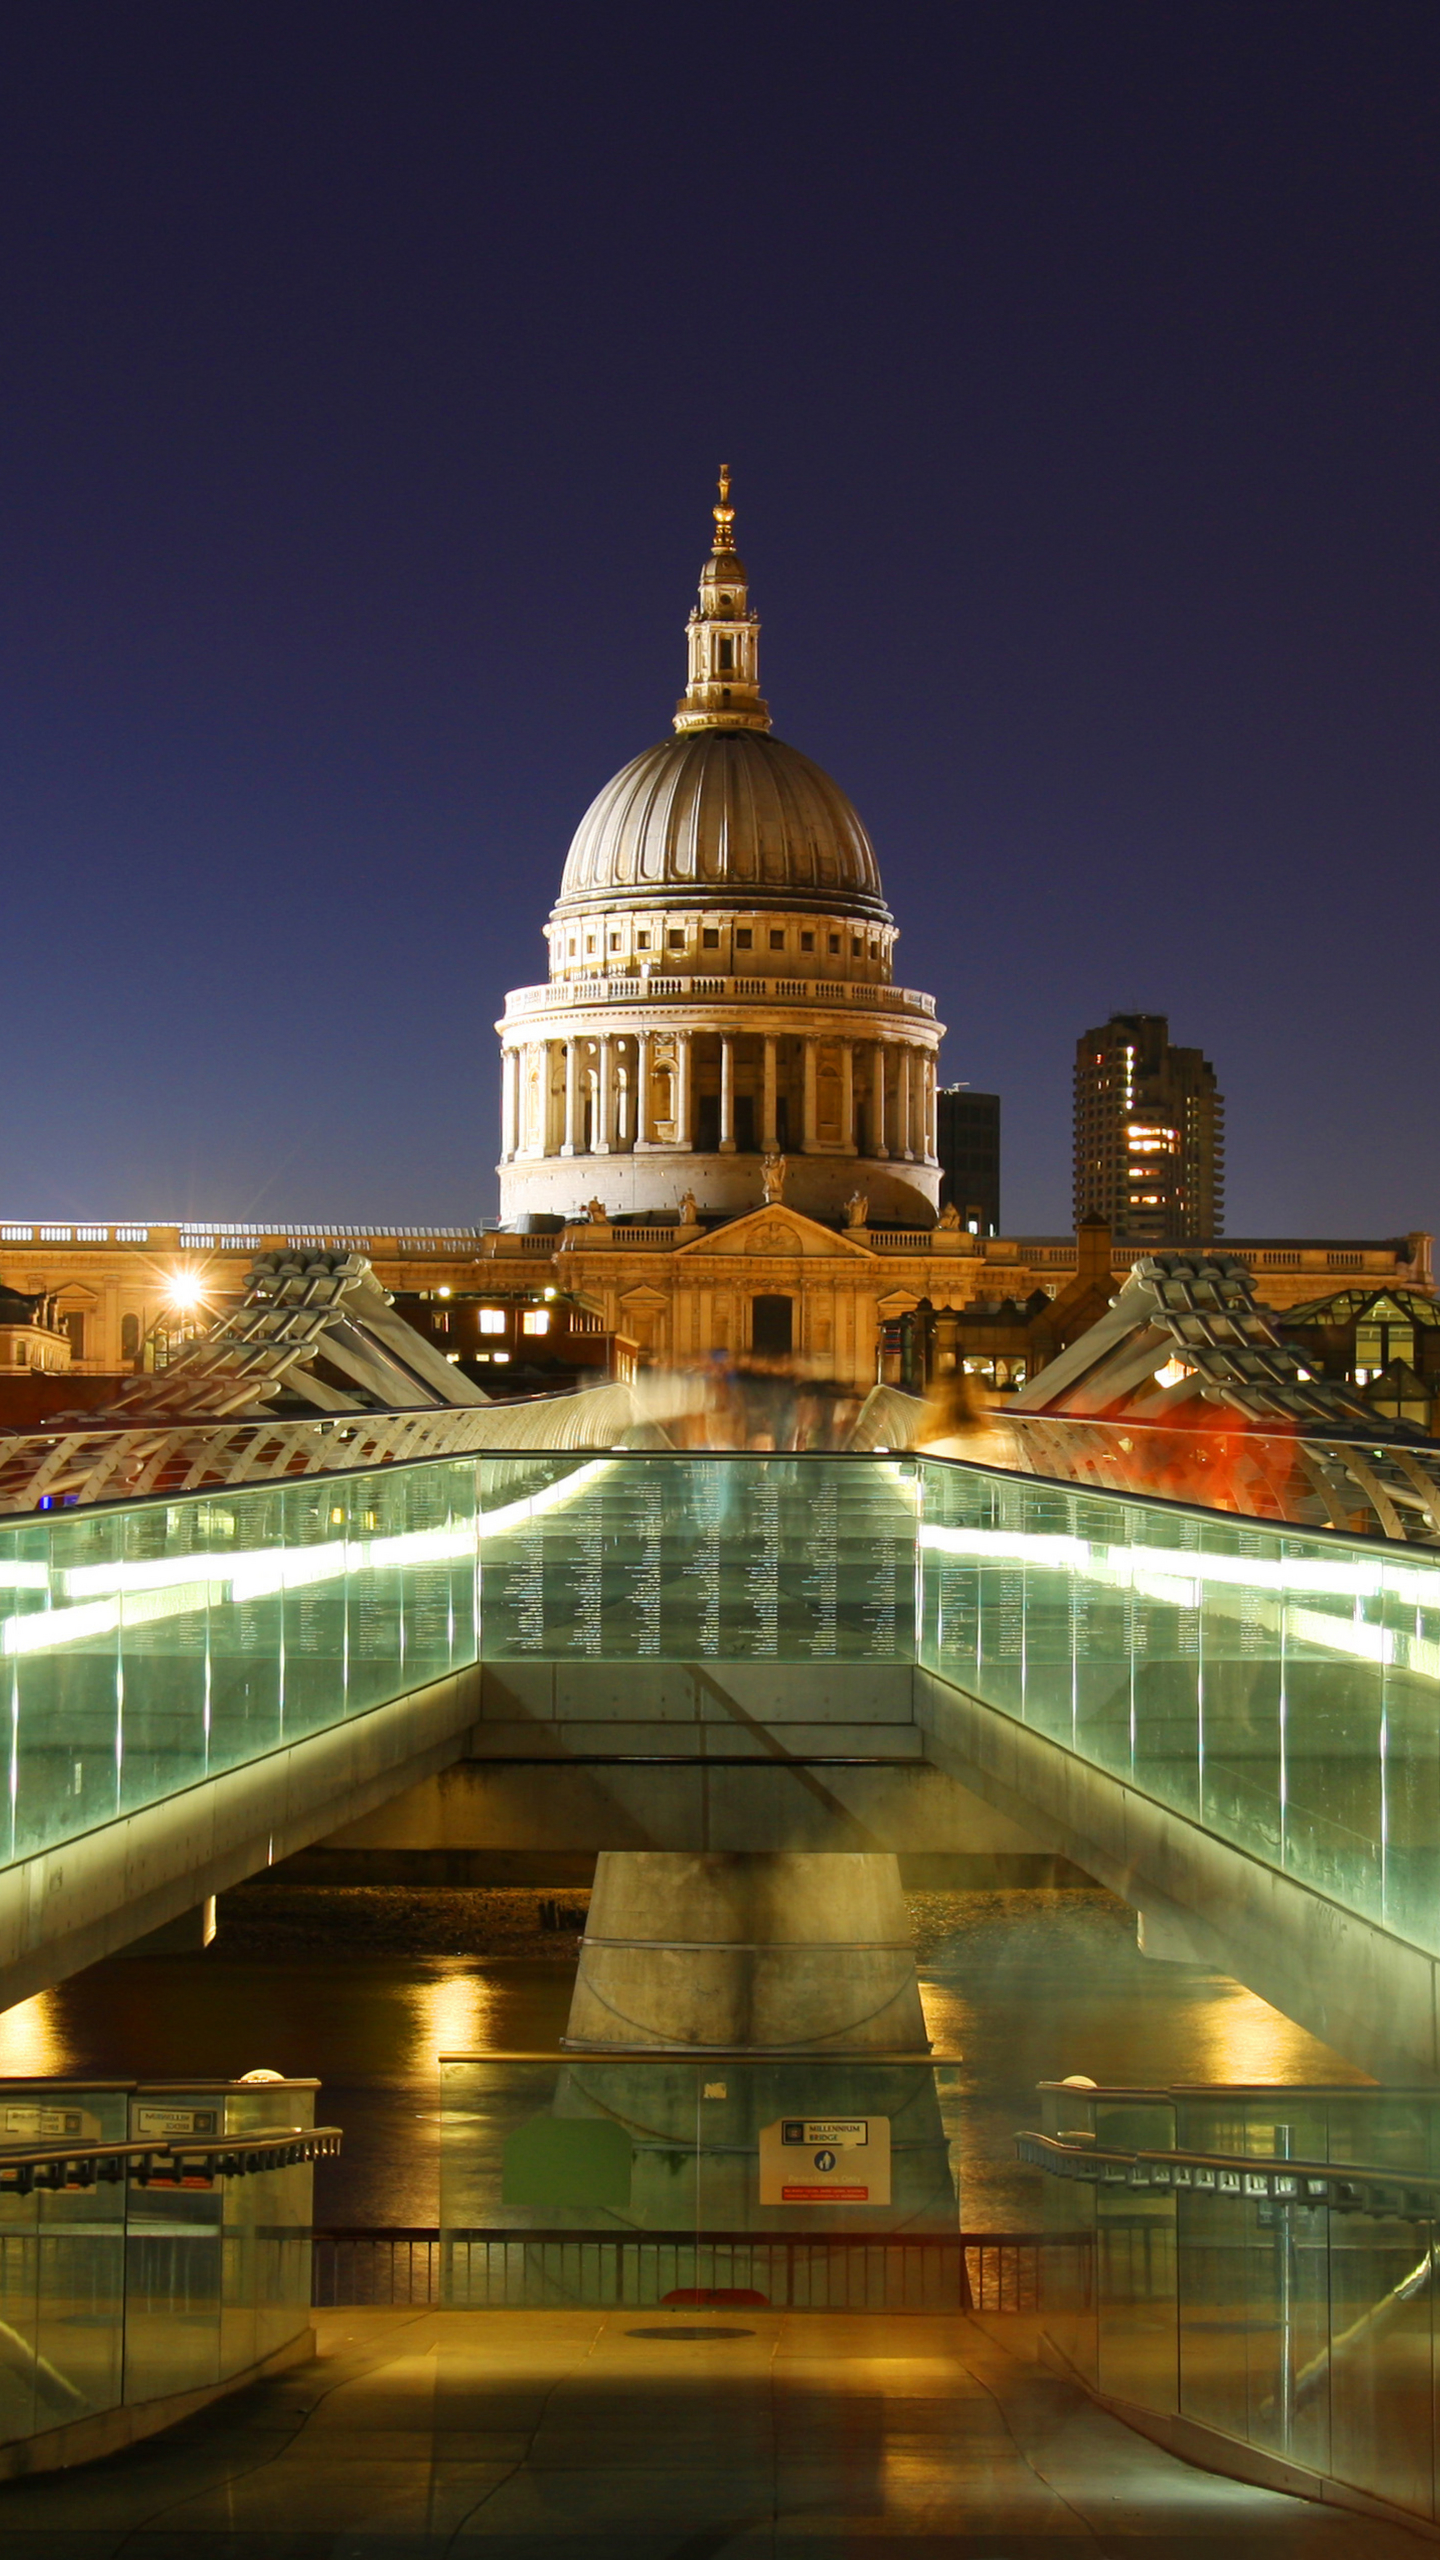 religious, st paul's cathedral, millennium bridge, united kingdom, cathedral, monument, light, london, building, night, cathedrals